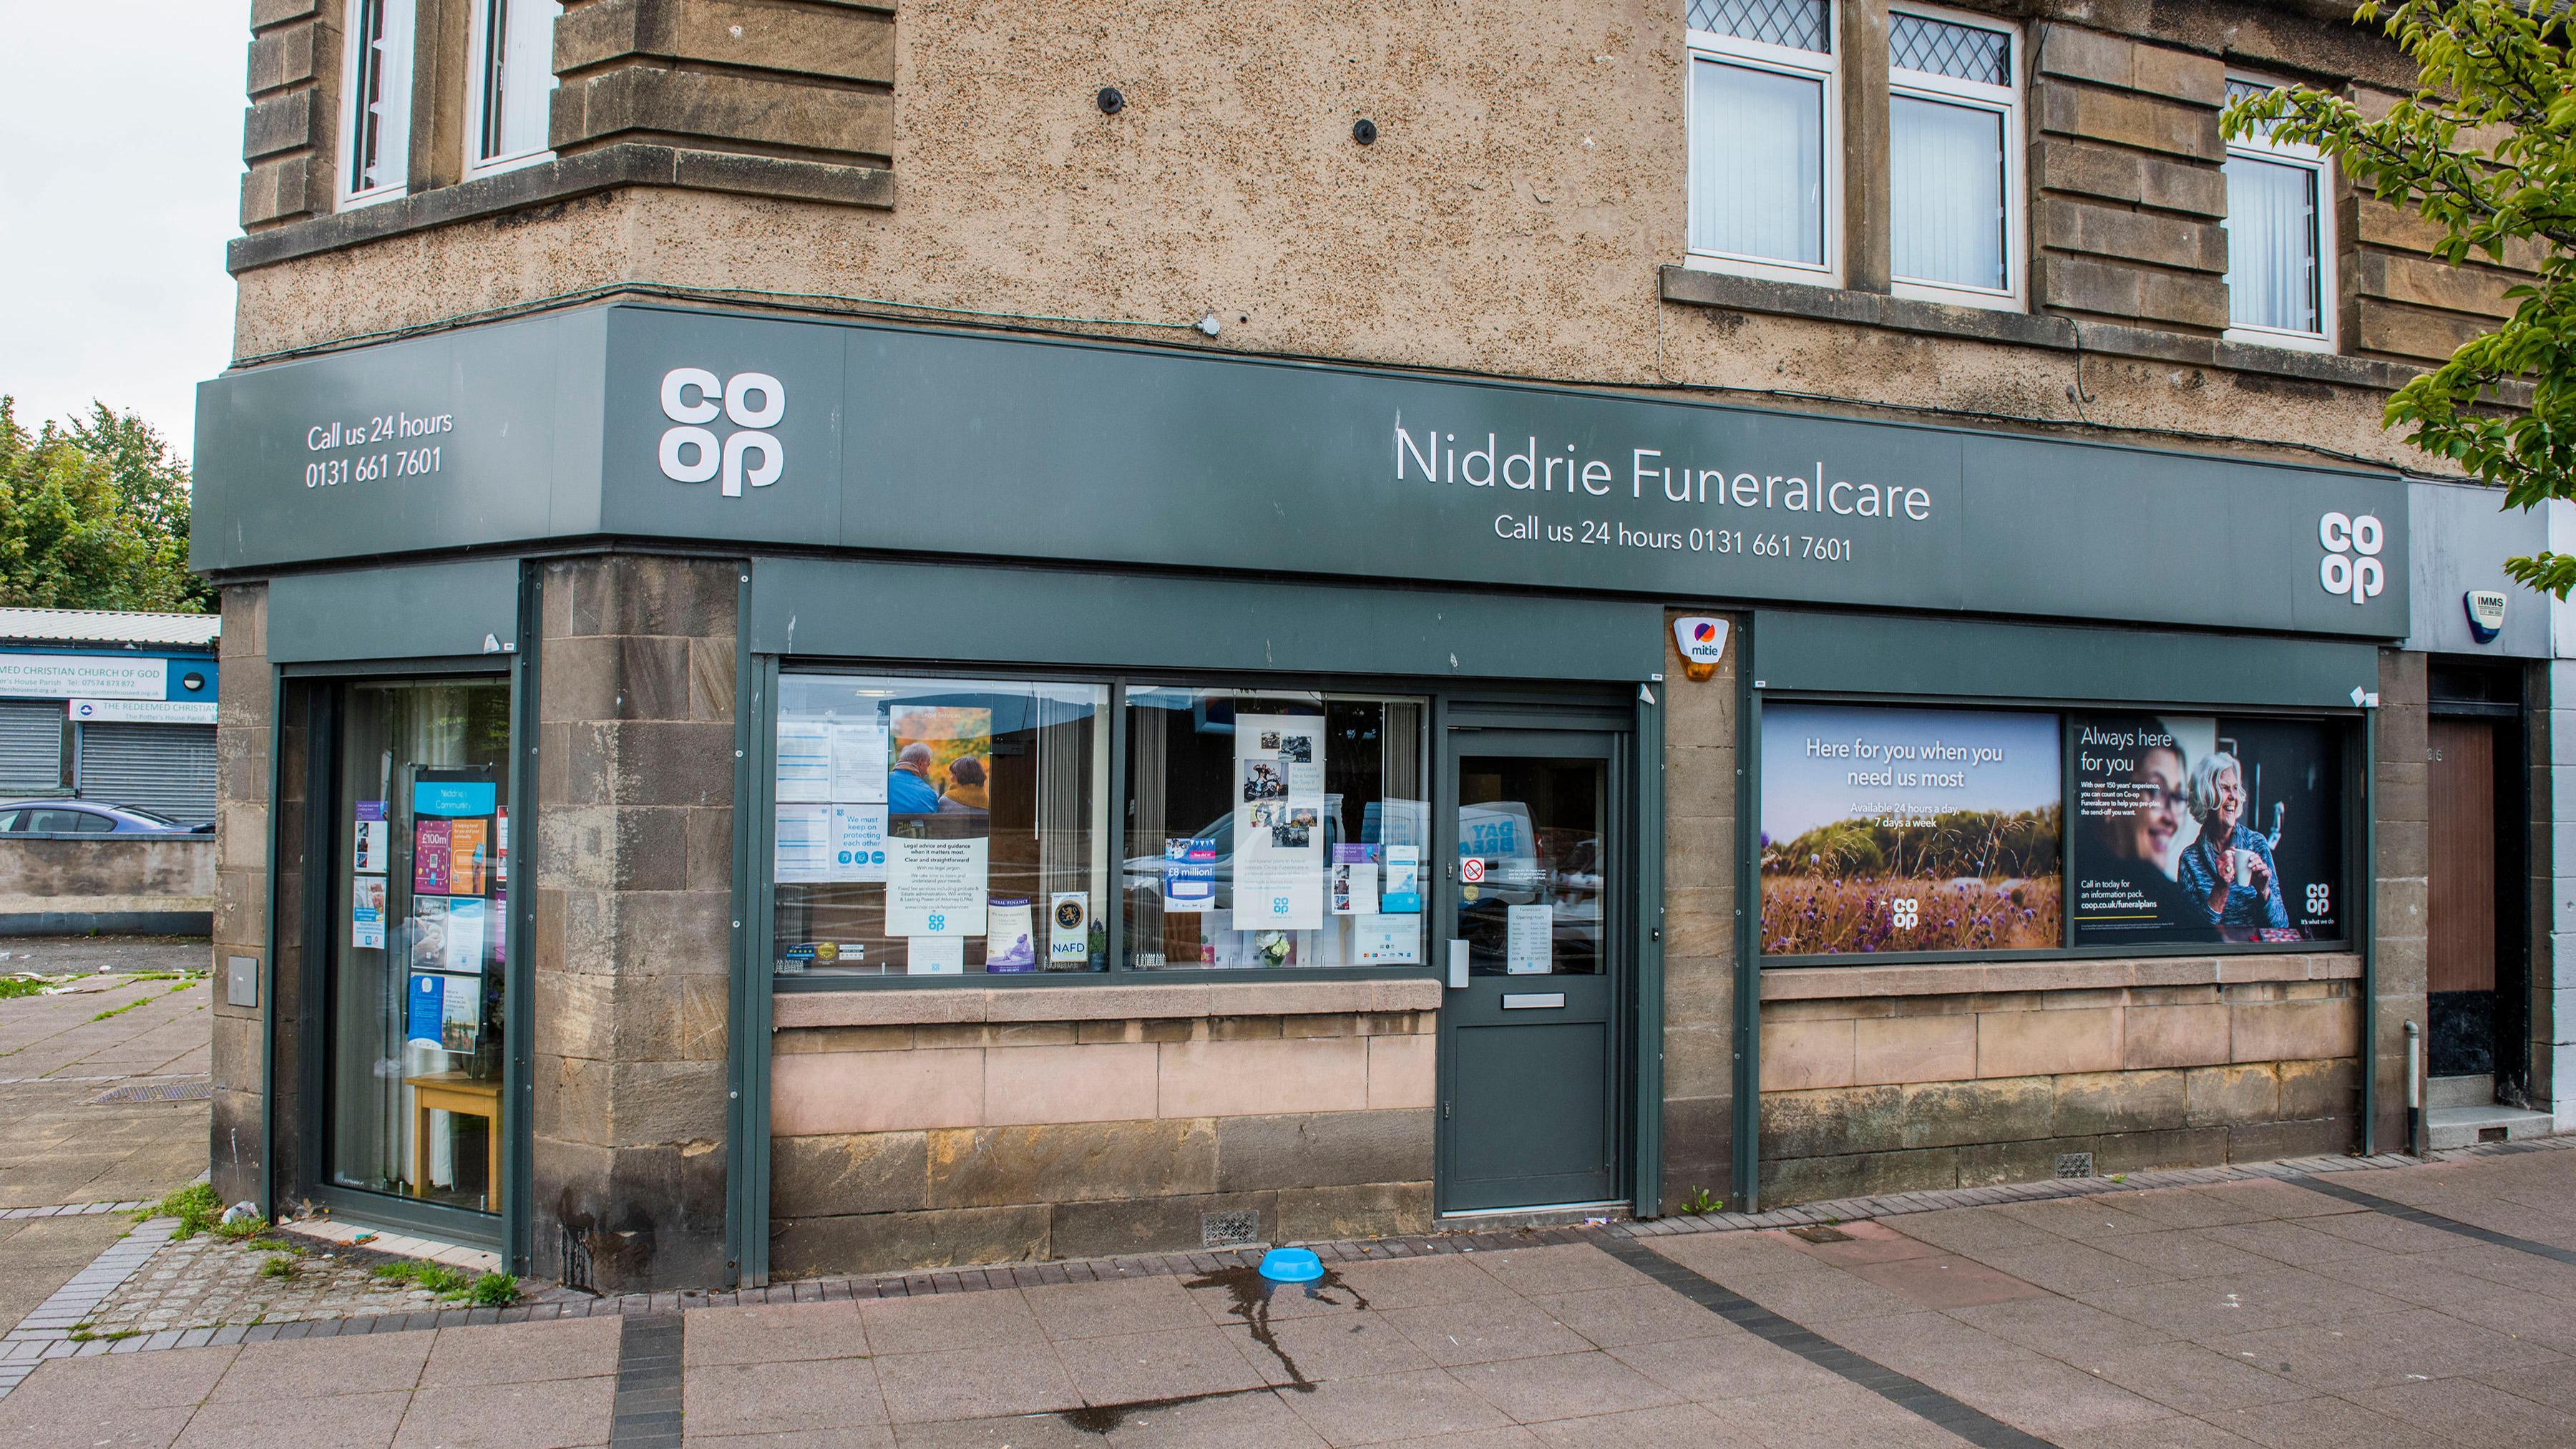 Images Niddrie Funeralcare